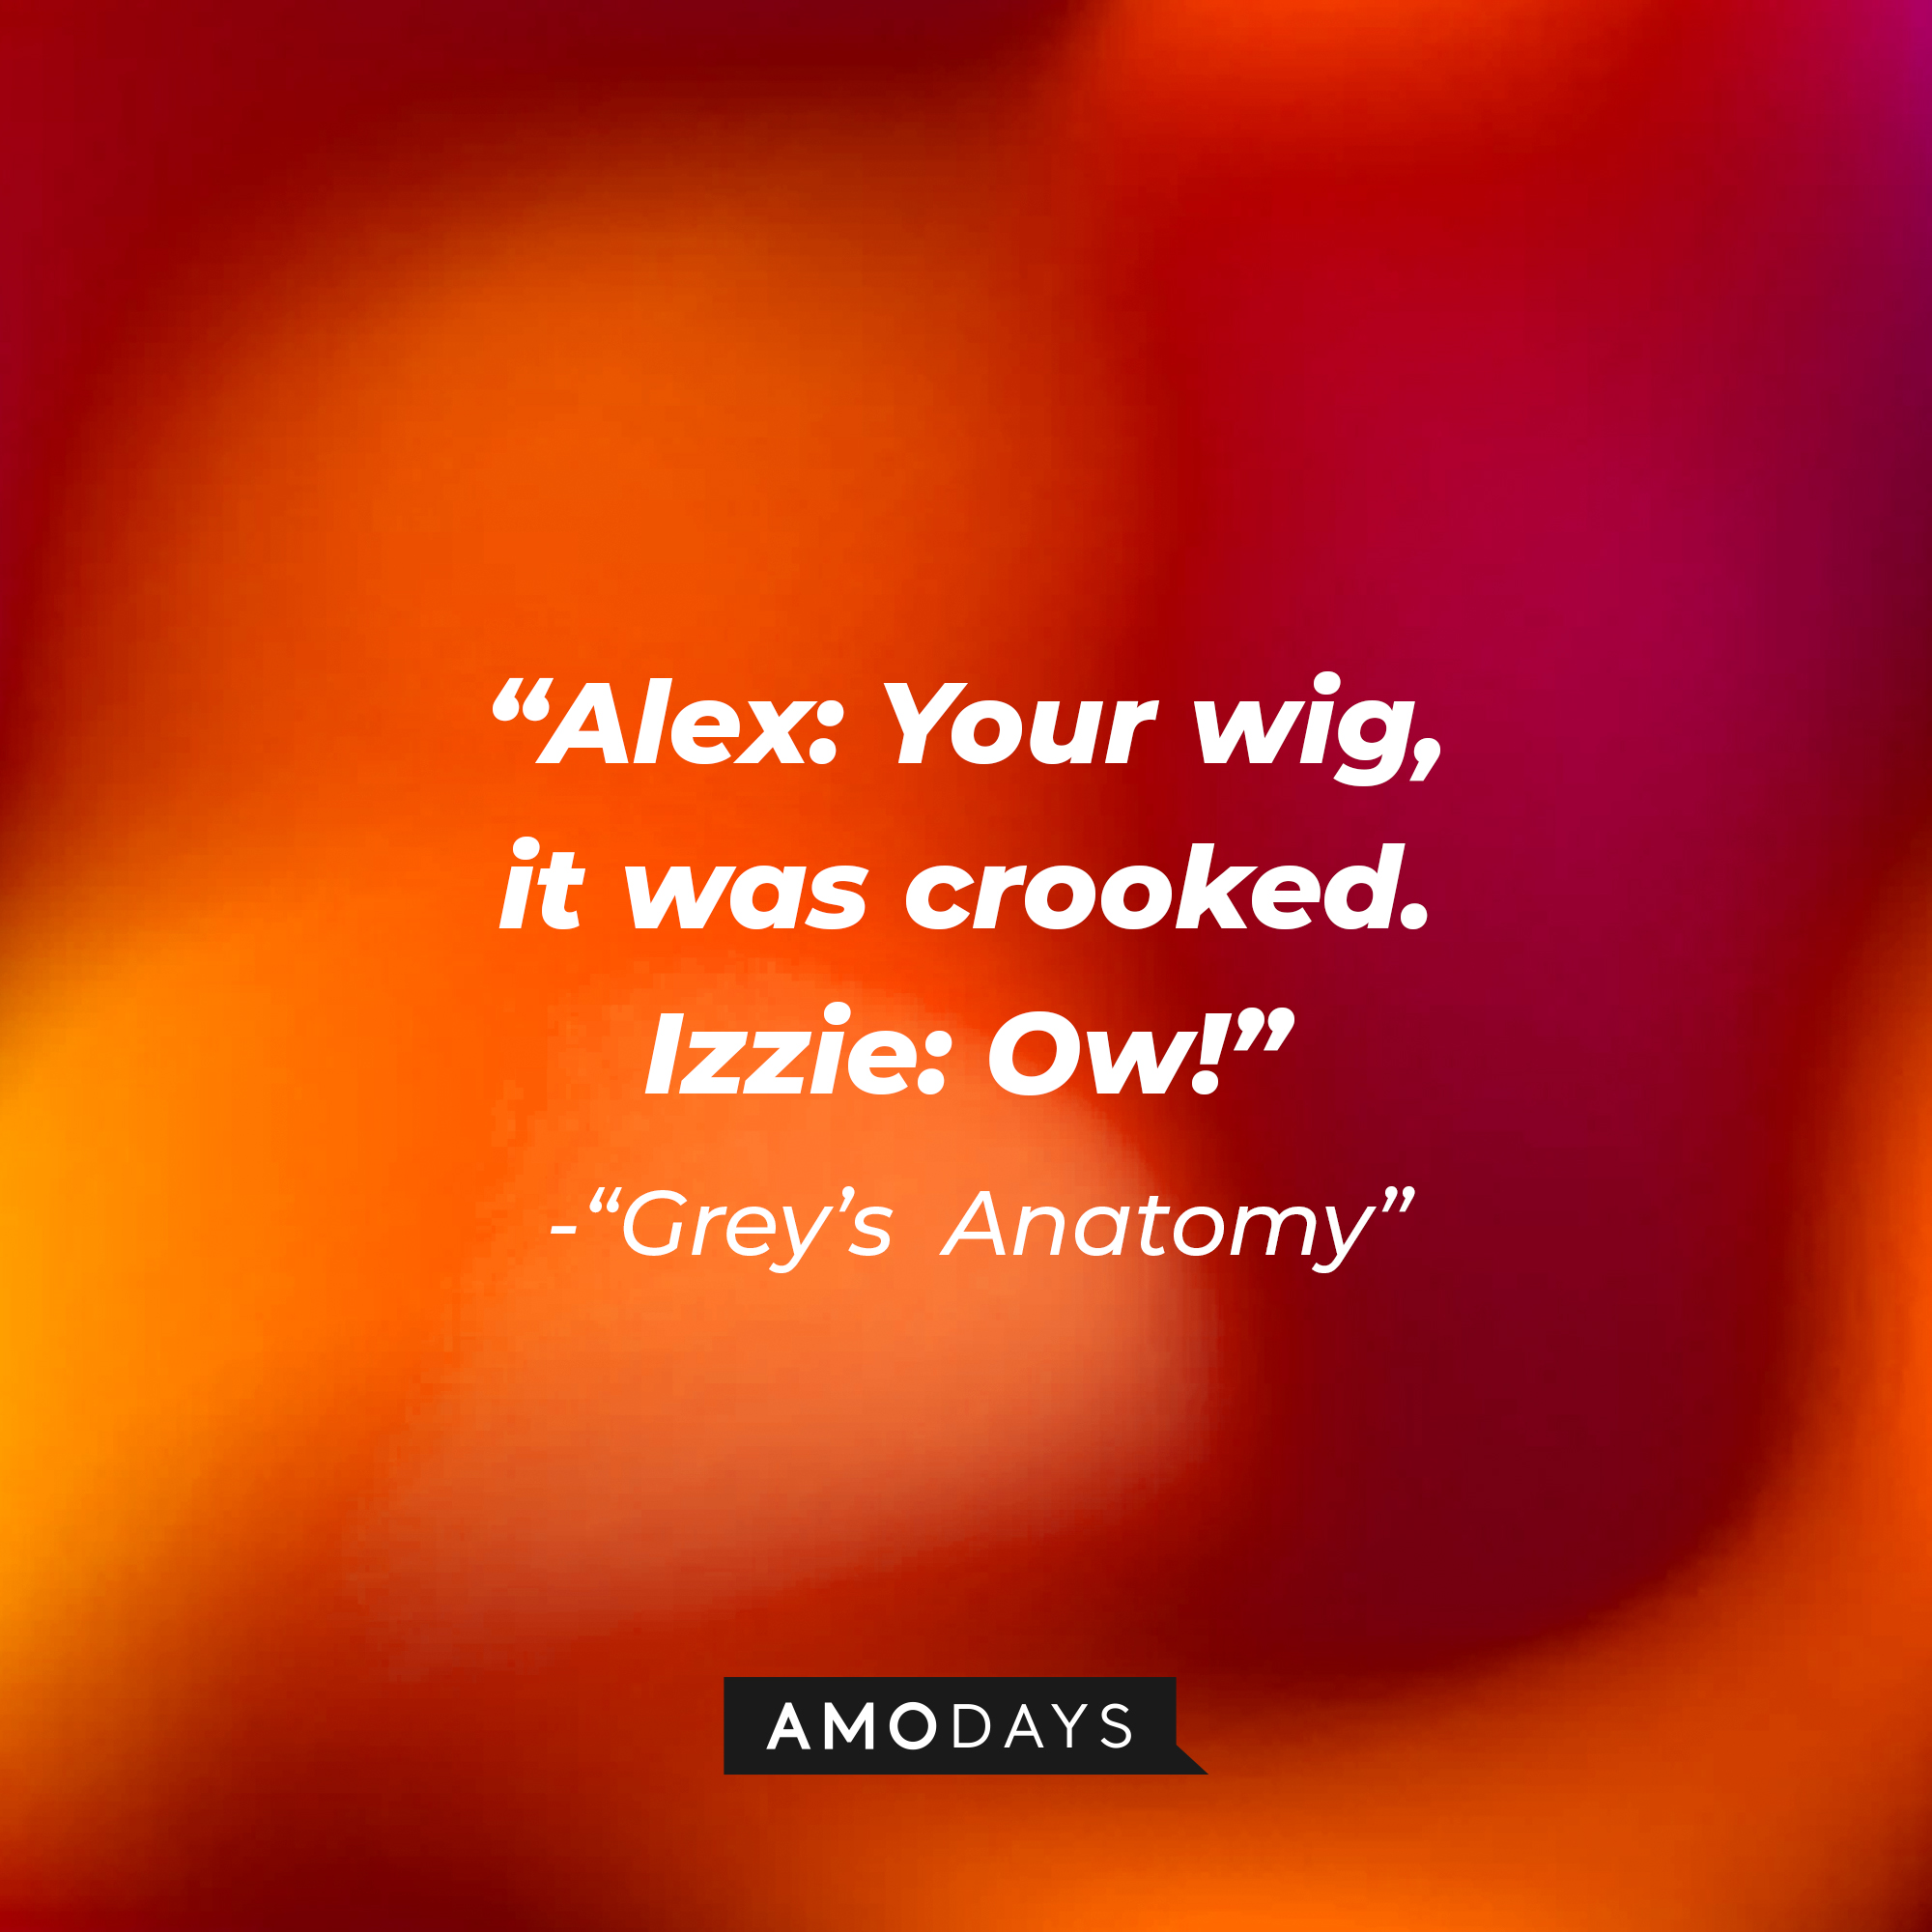 Alex's quote: "Your wig. it was crooked." Izzie: Ow!" | Image: Amodays